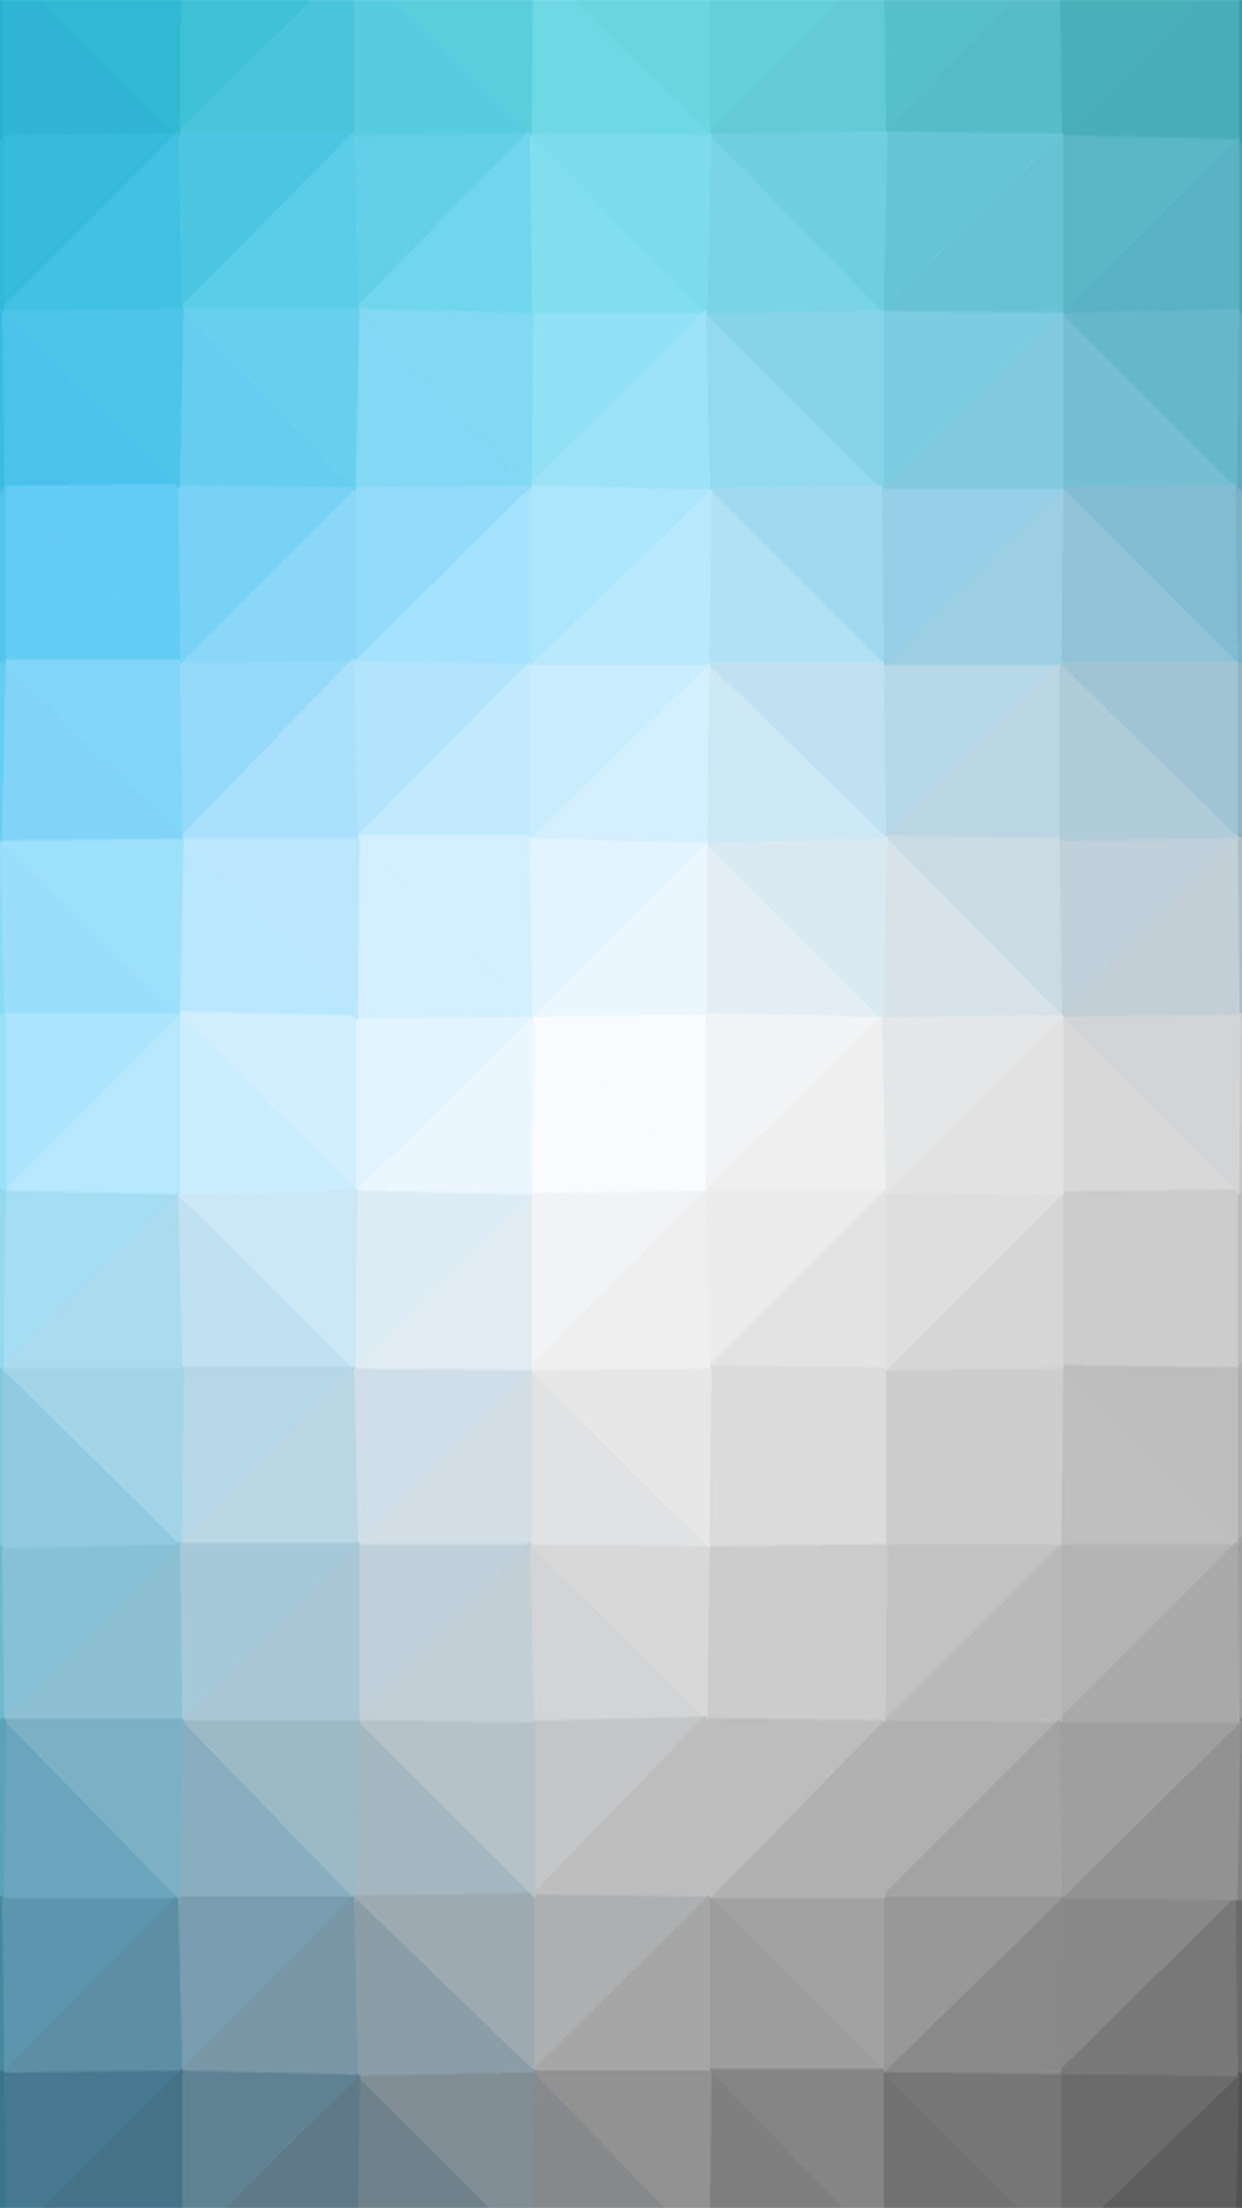 Tri Abstract Blue Pattern Android wallpaper